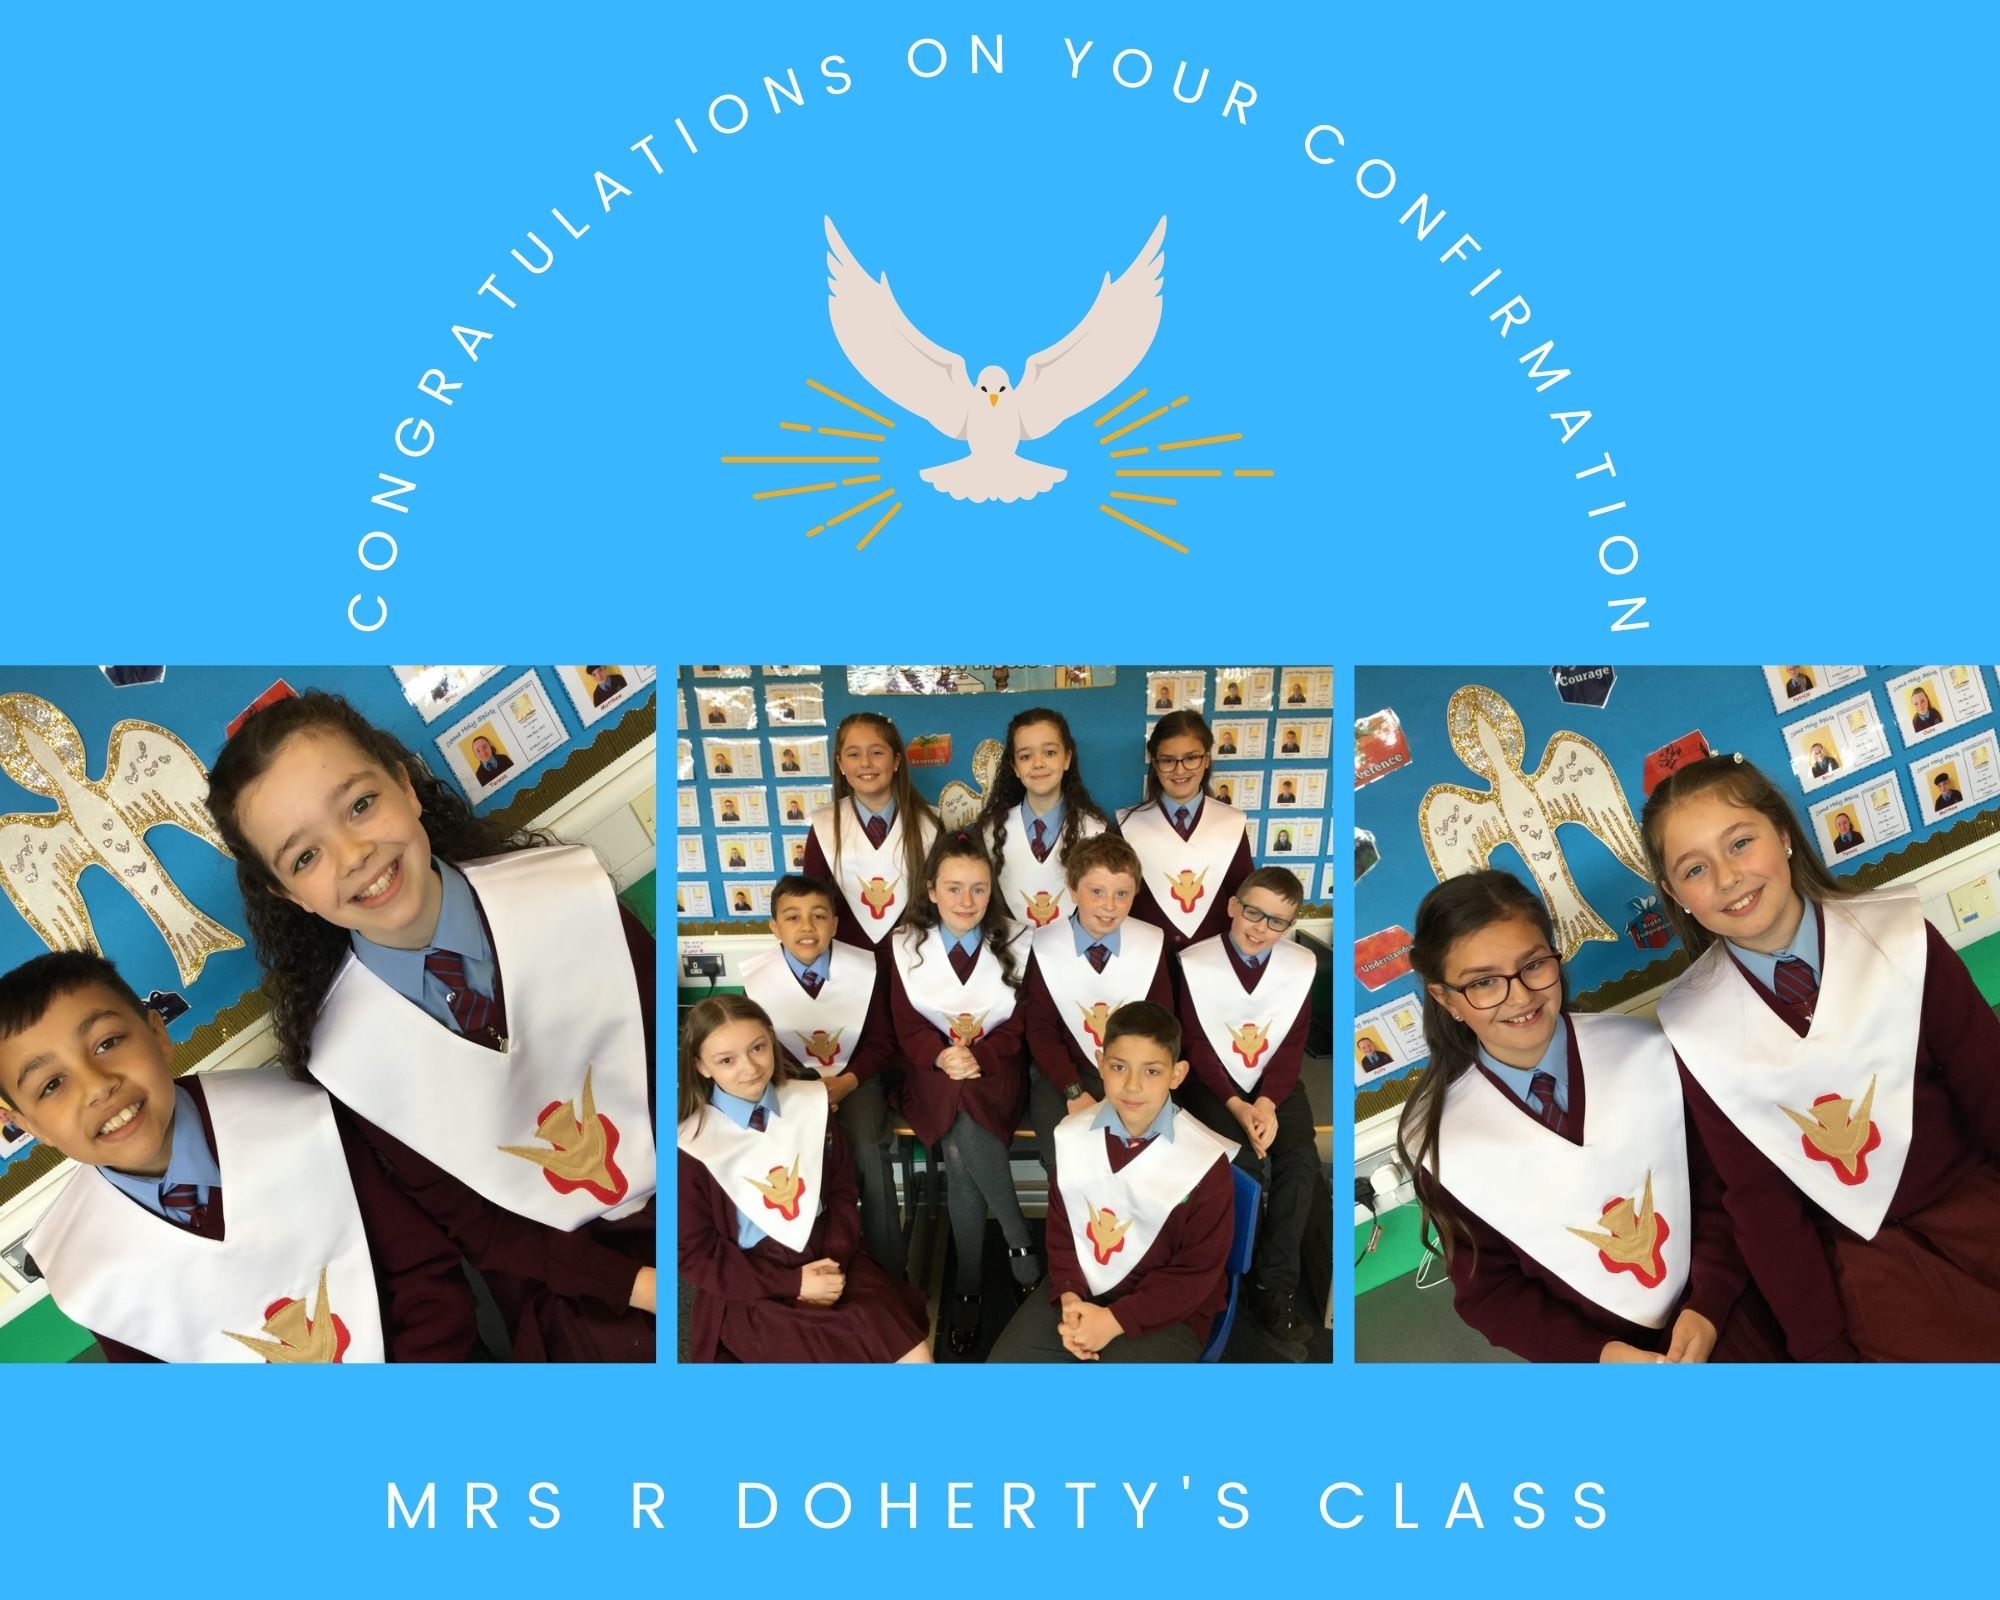 Mrs R Doherty's Confirmation Class